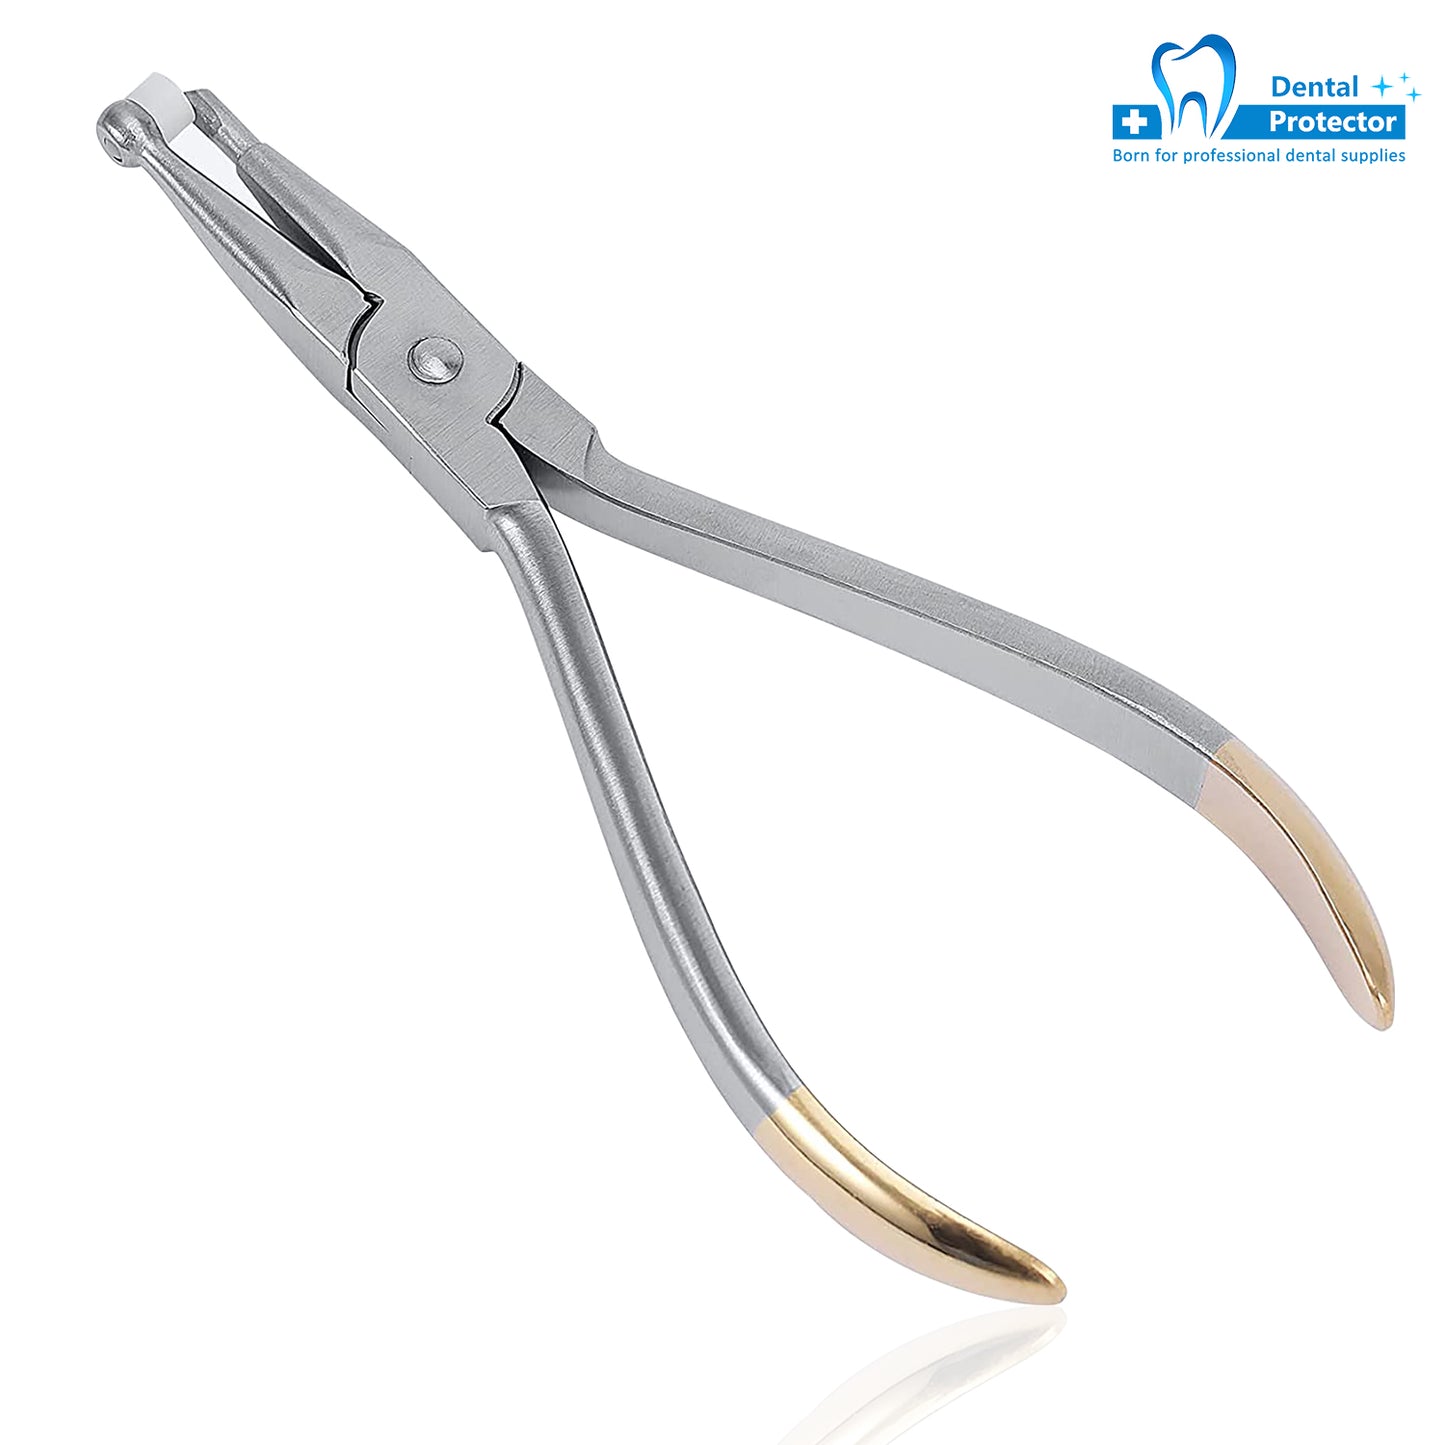 Dental Adhesive Removing Pliers, Orthodontic Bandage Remover Forceps Dental Surgical Instrument Tool Tooth Pulling Kit for Dentist - Easy to Use and Portable